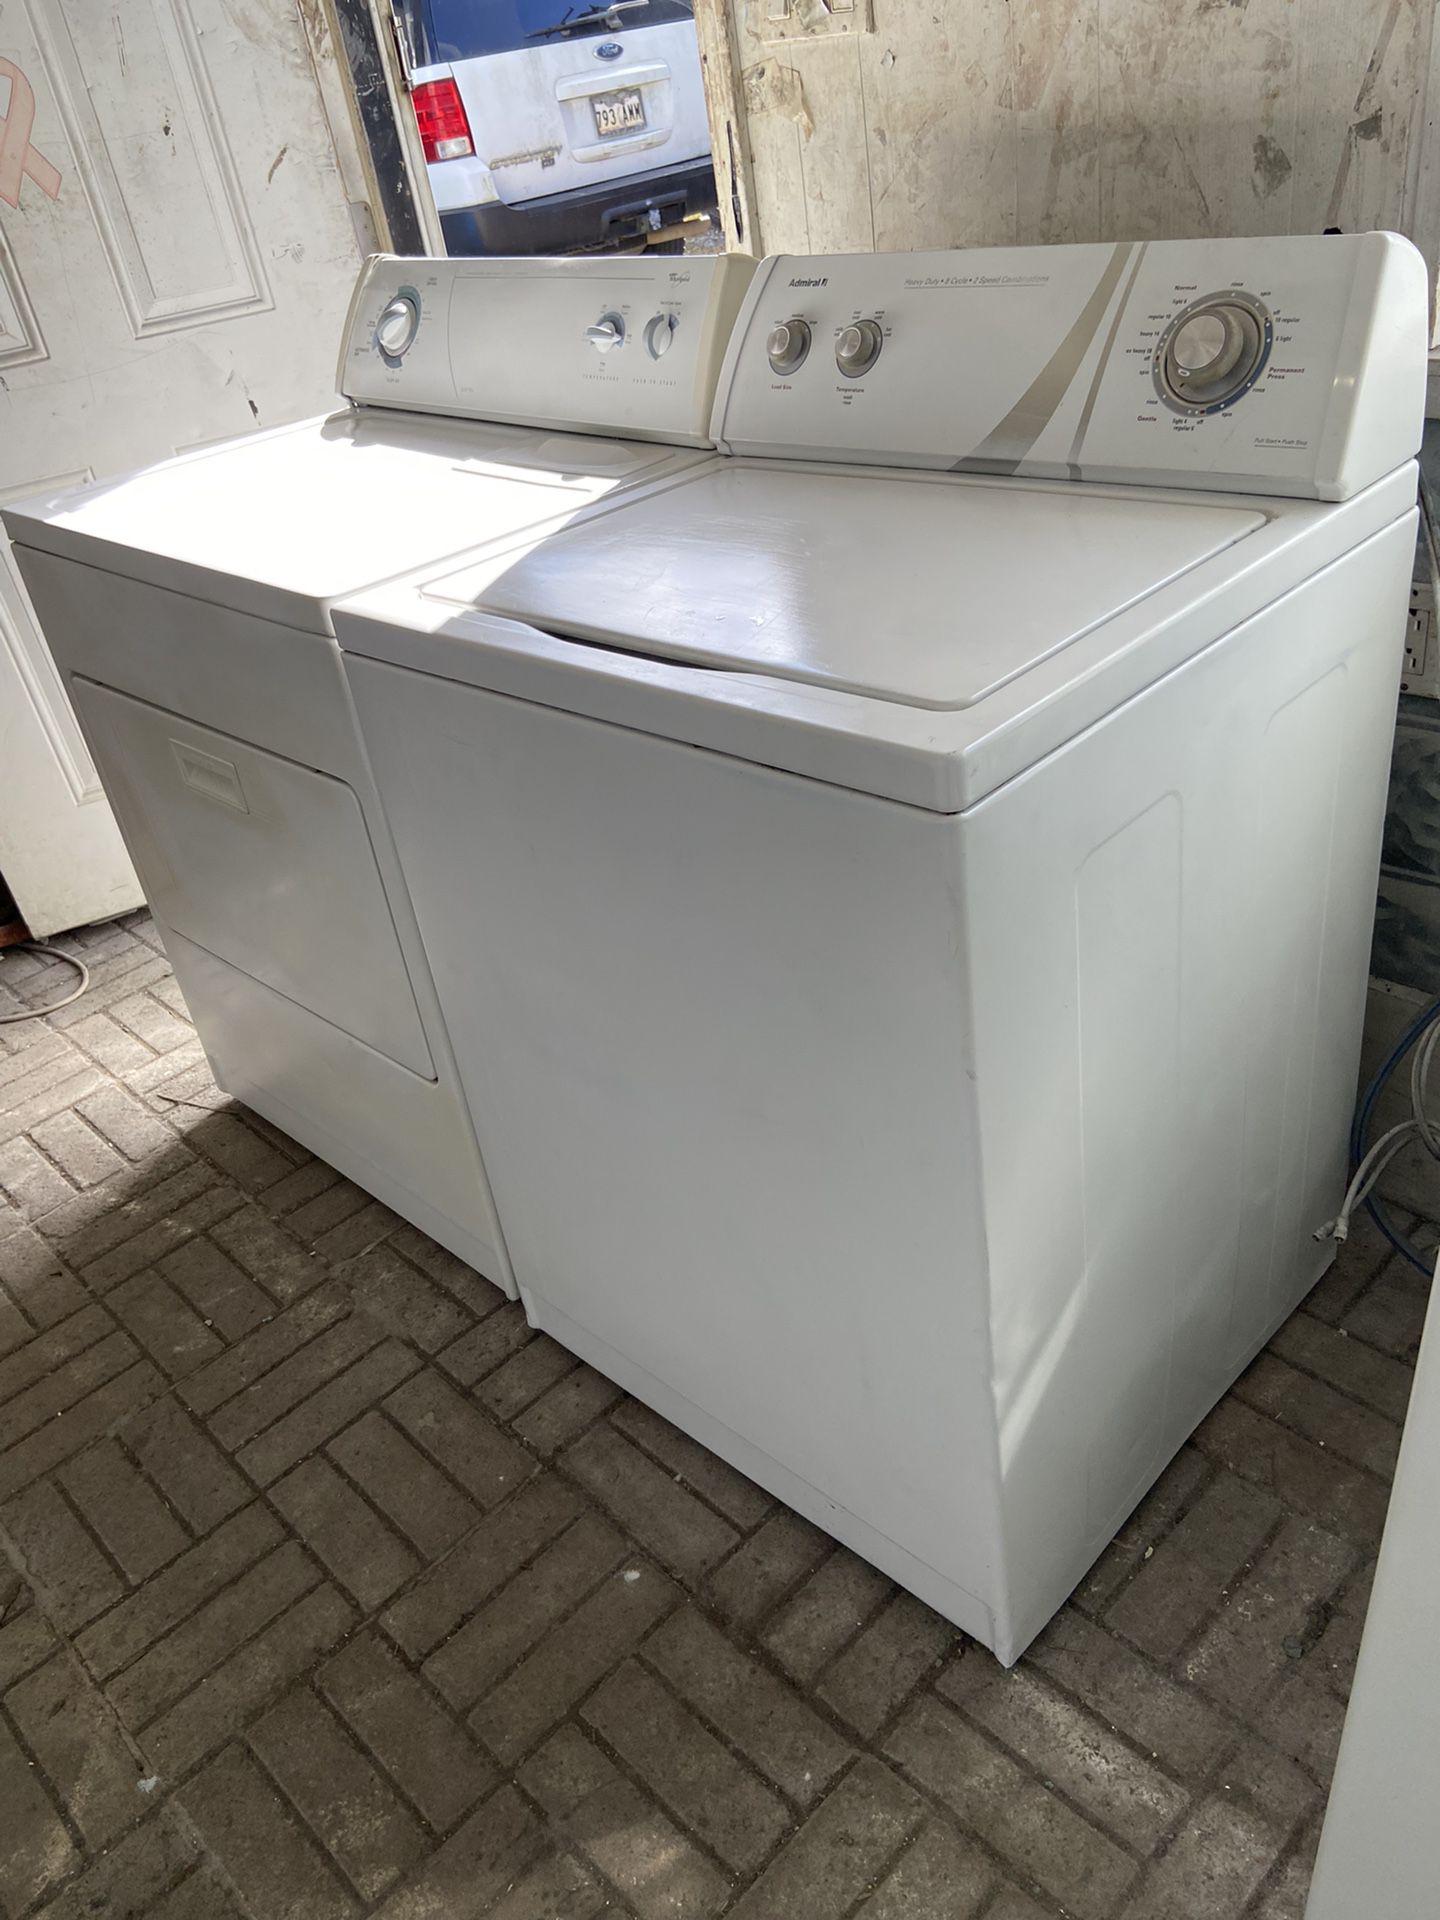 EXCELLENT RUNNING SUPER CAPACITY WHIRLPOOL WASHER & ELECTRIC DRYER SET! BOTH RUN LIKE BRAND NEW! NO ISSUES WITH EITHER ONE. ILL RUN BOTH FOR YOU THROU